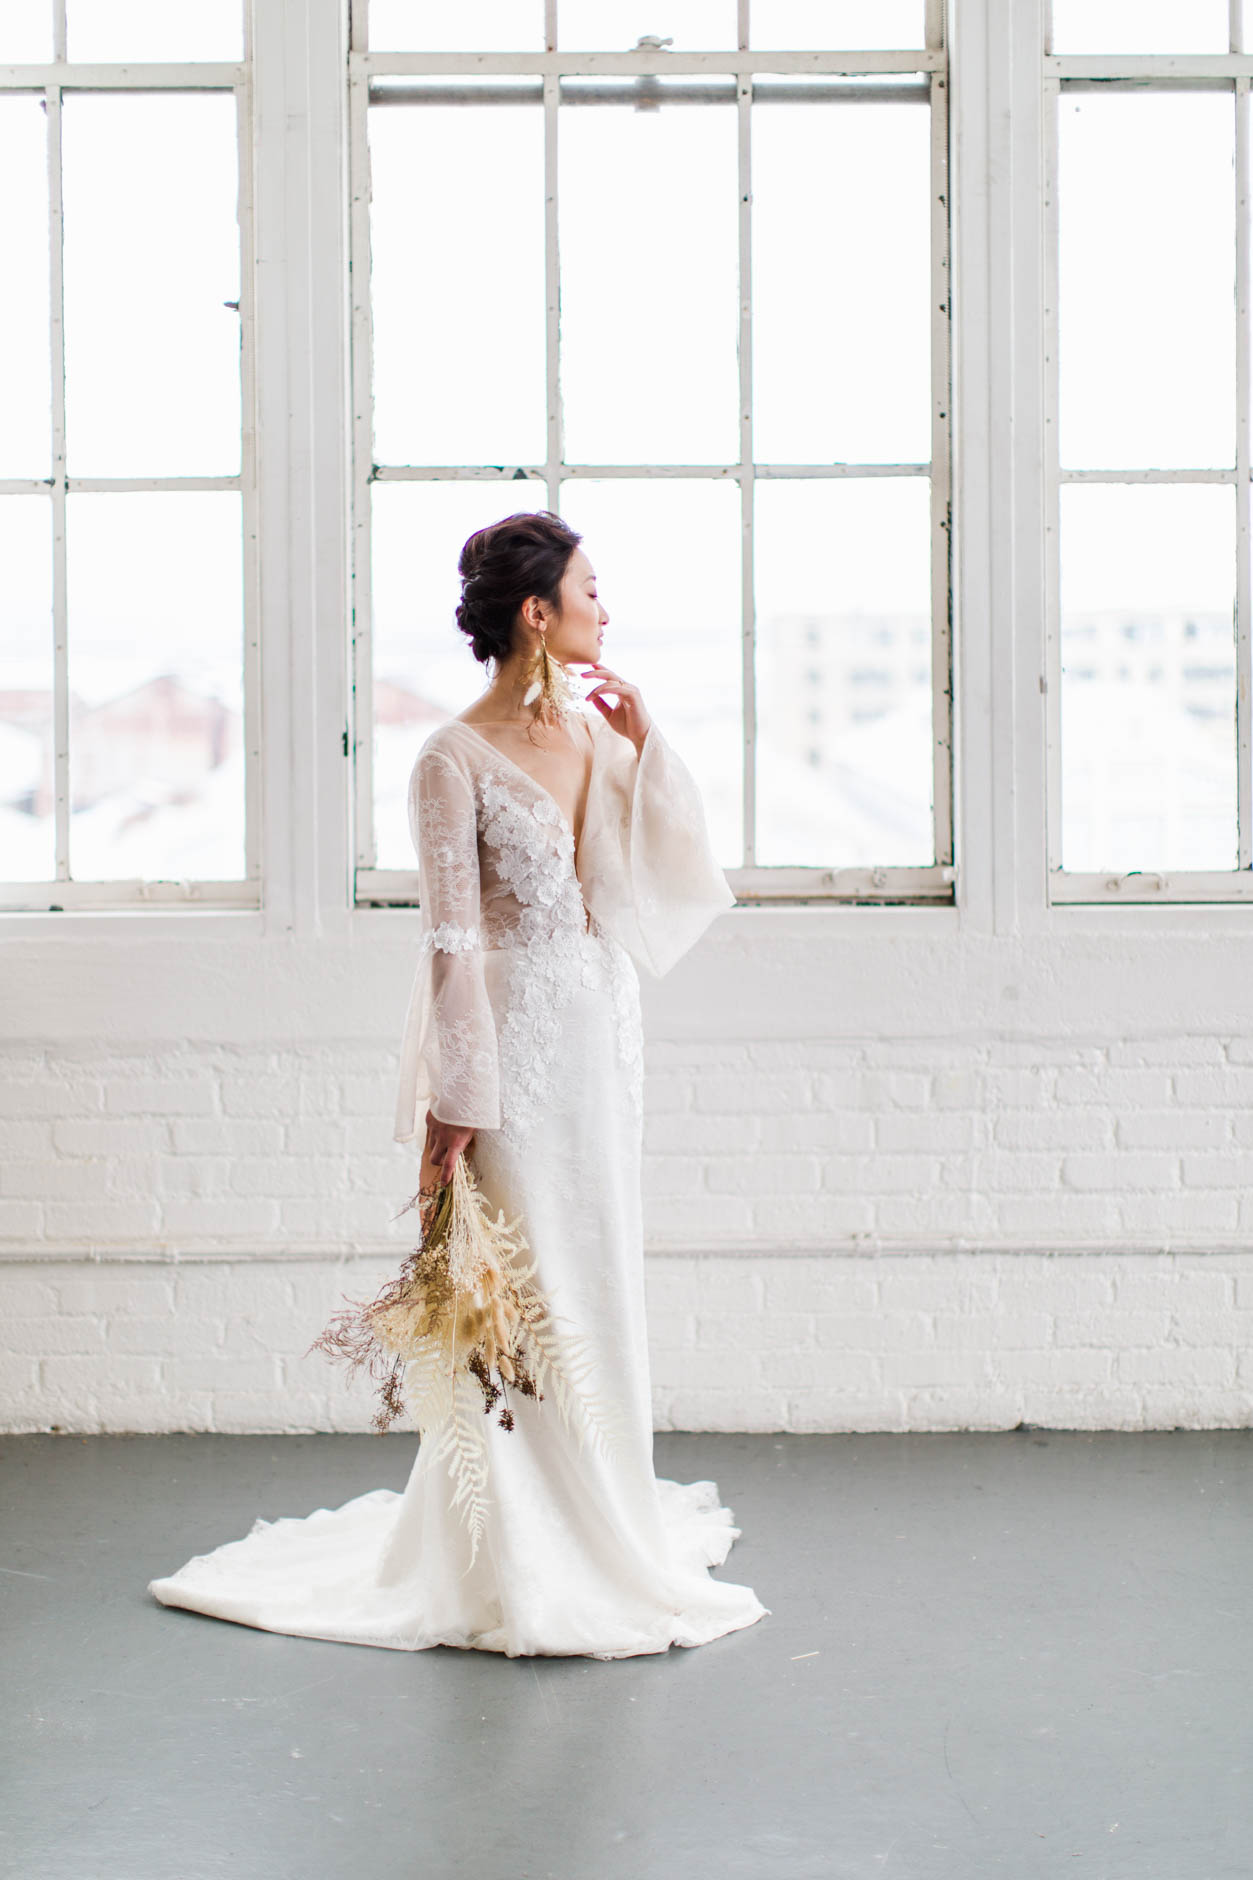 Bride standing in front of windows in modern warehouse wedding inspiration